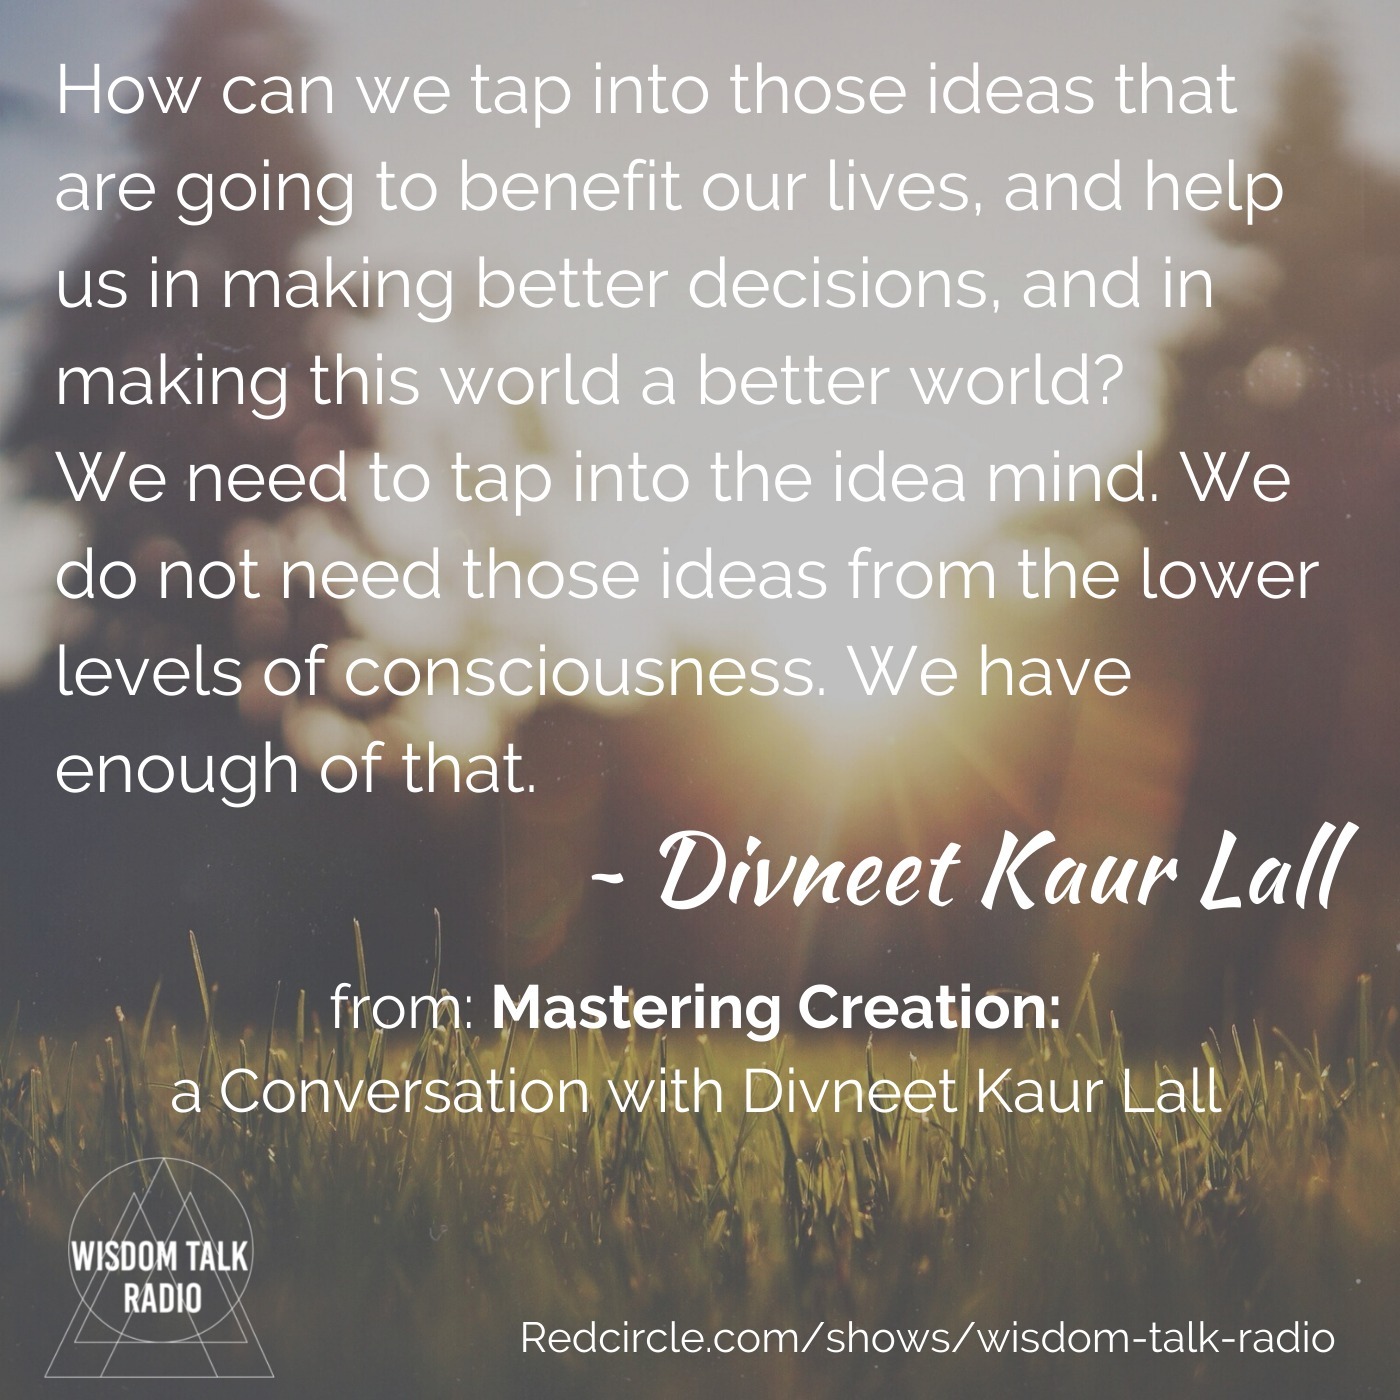 Mastering Creation: a conversation with Divneet Kaur Lall